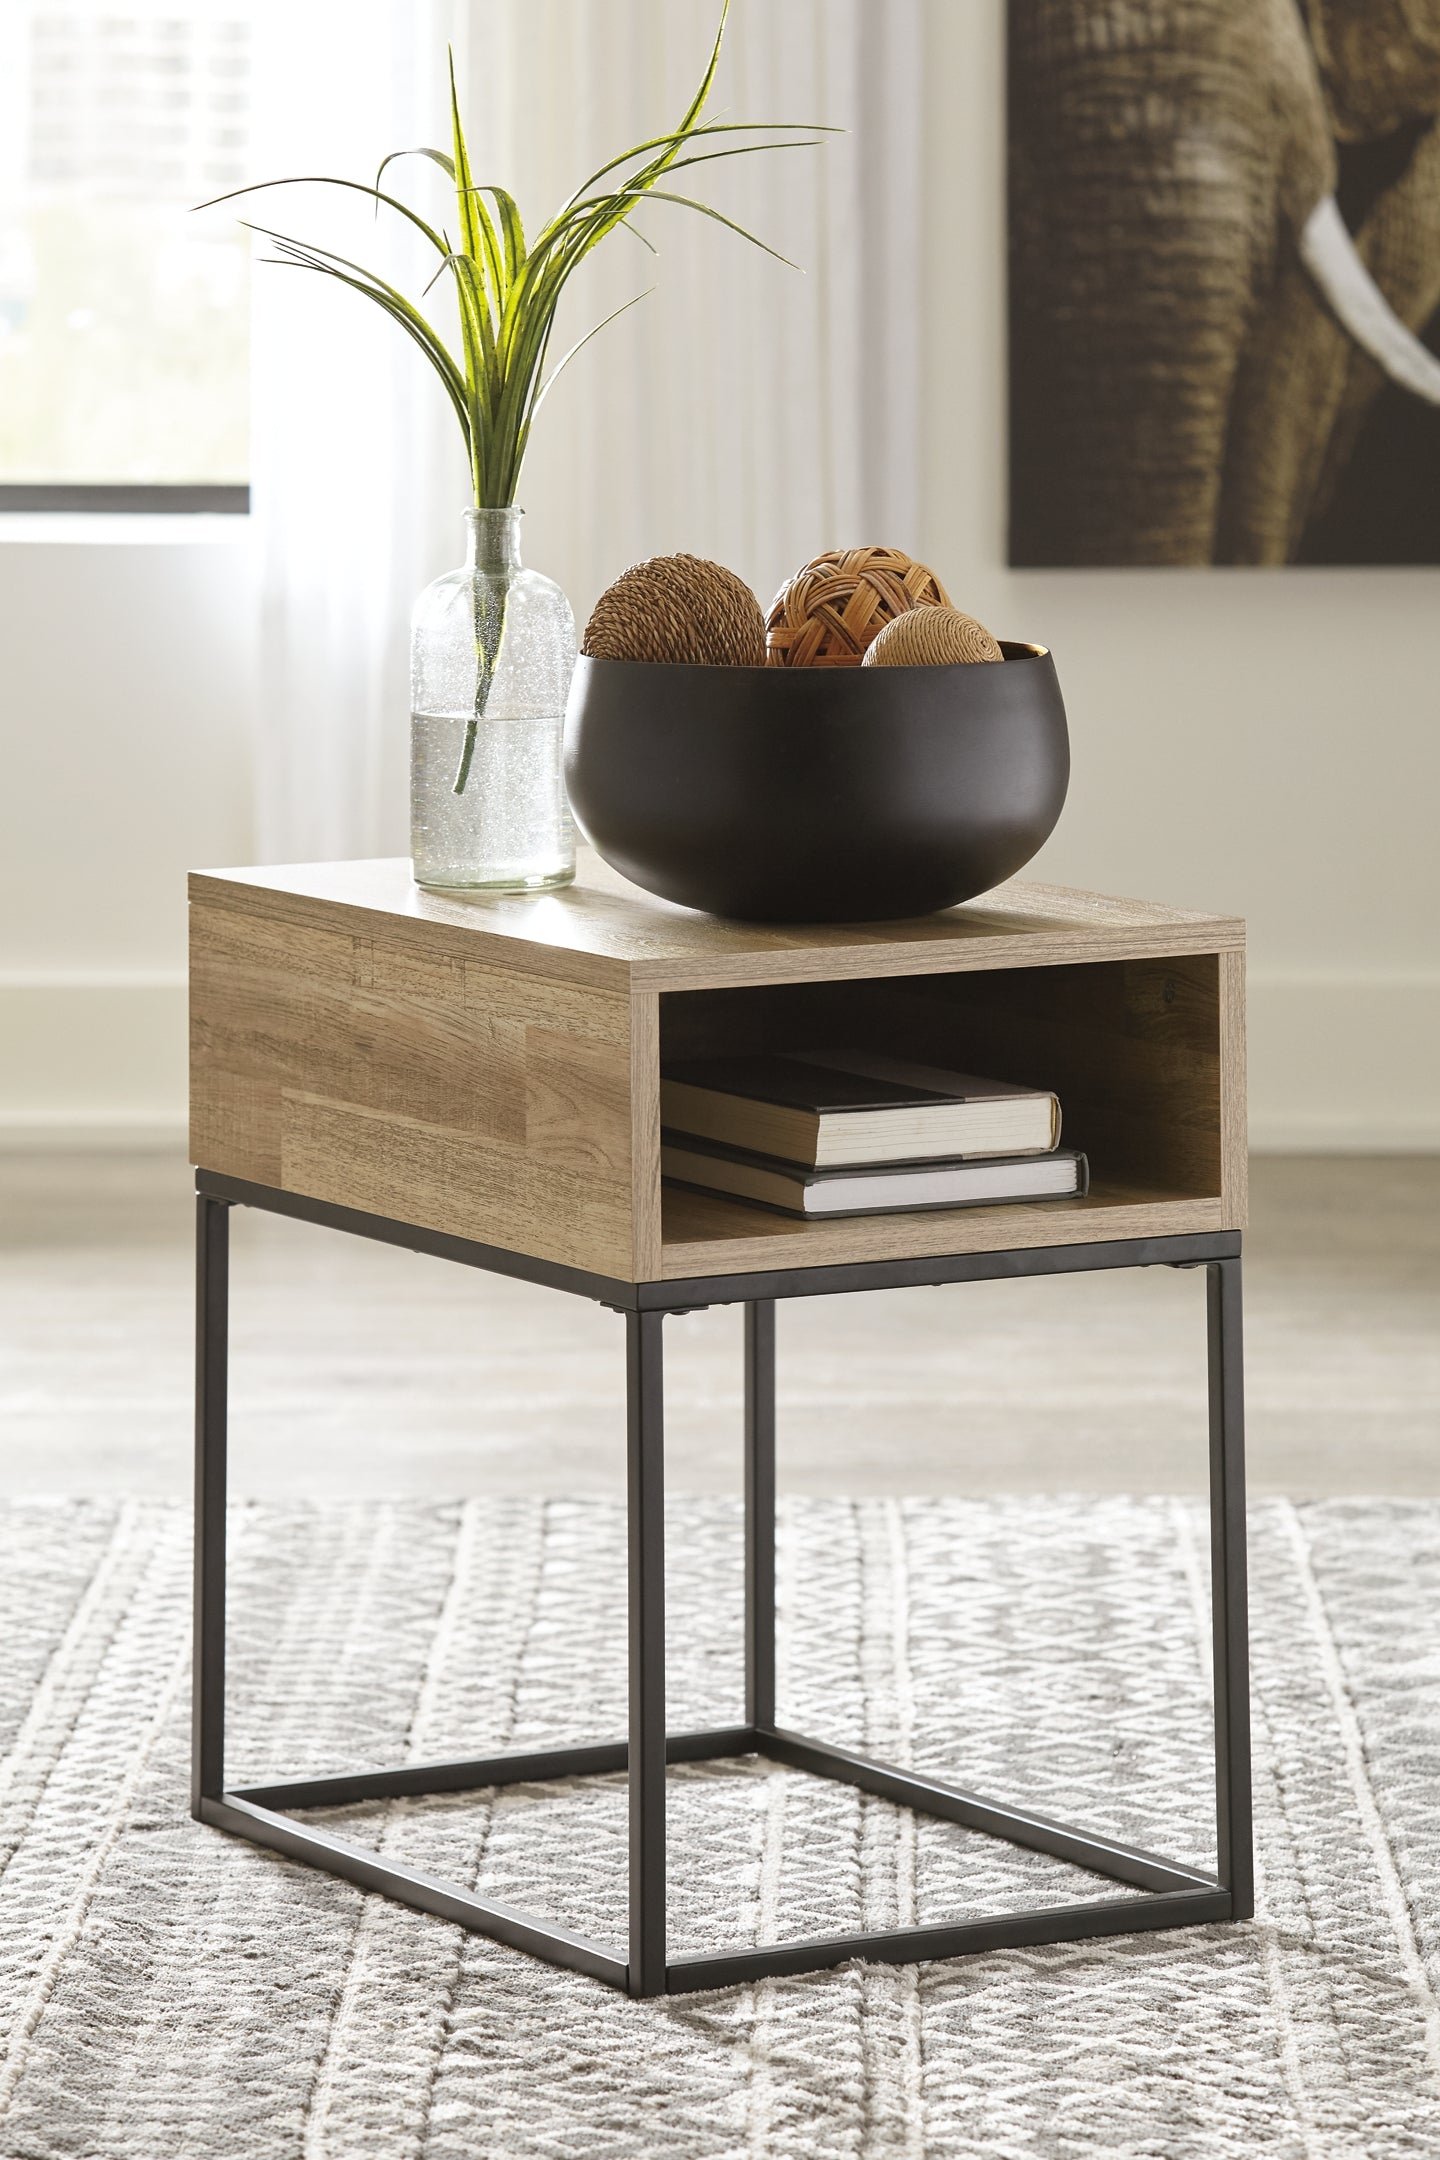 Gerdanet Coffee Table with 1 End Table Wilson Furniture (OH)  in Bridgeport, Ohio. Serving Bridgeport, Yorkville, Bellaire, & Avondale